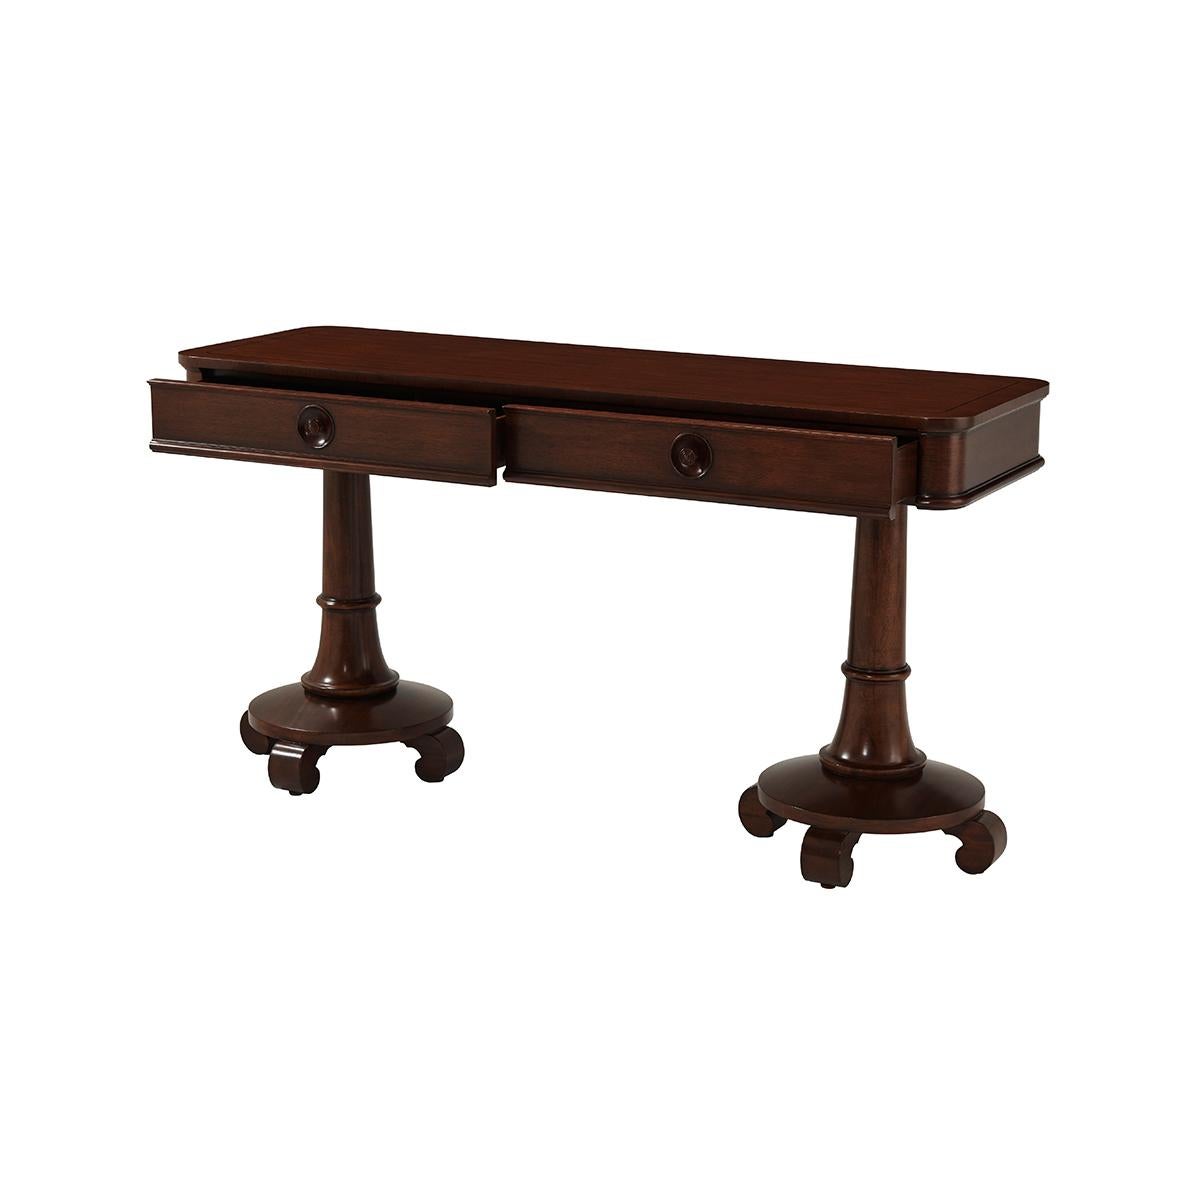 An unusual dual classic pedestal design. The rectangular European-style console is finished in a warm medium brown with two drawers.
Dimensions: 60